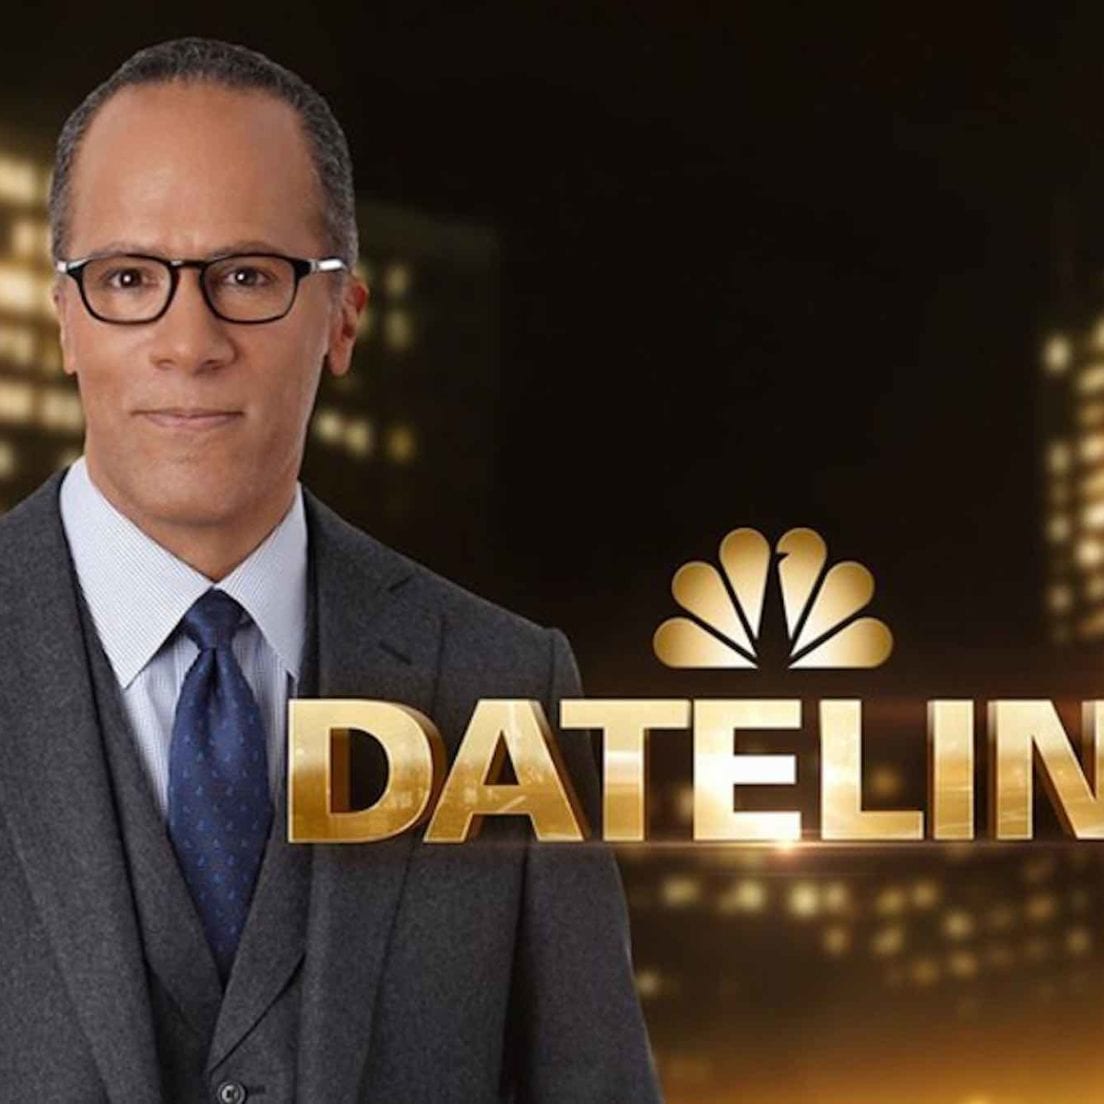 Here's why 'Dateline' "Jagged" is one of the craziest episodes yet